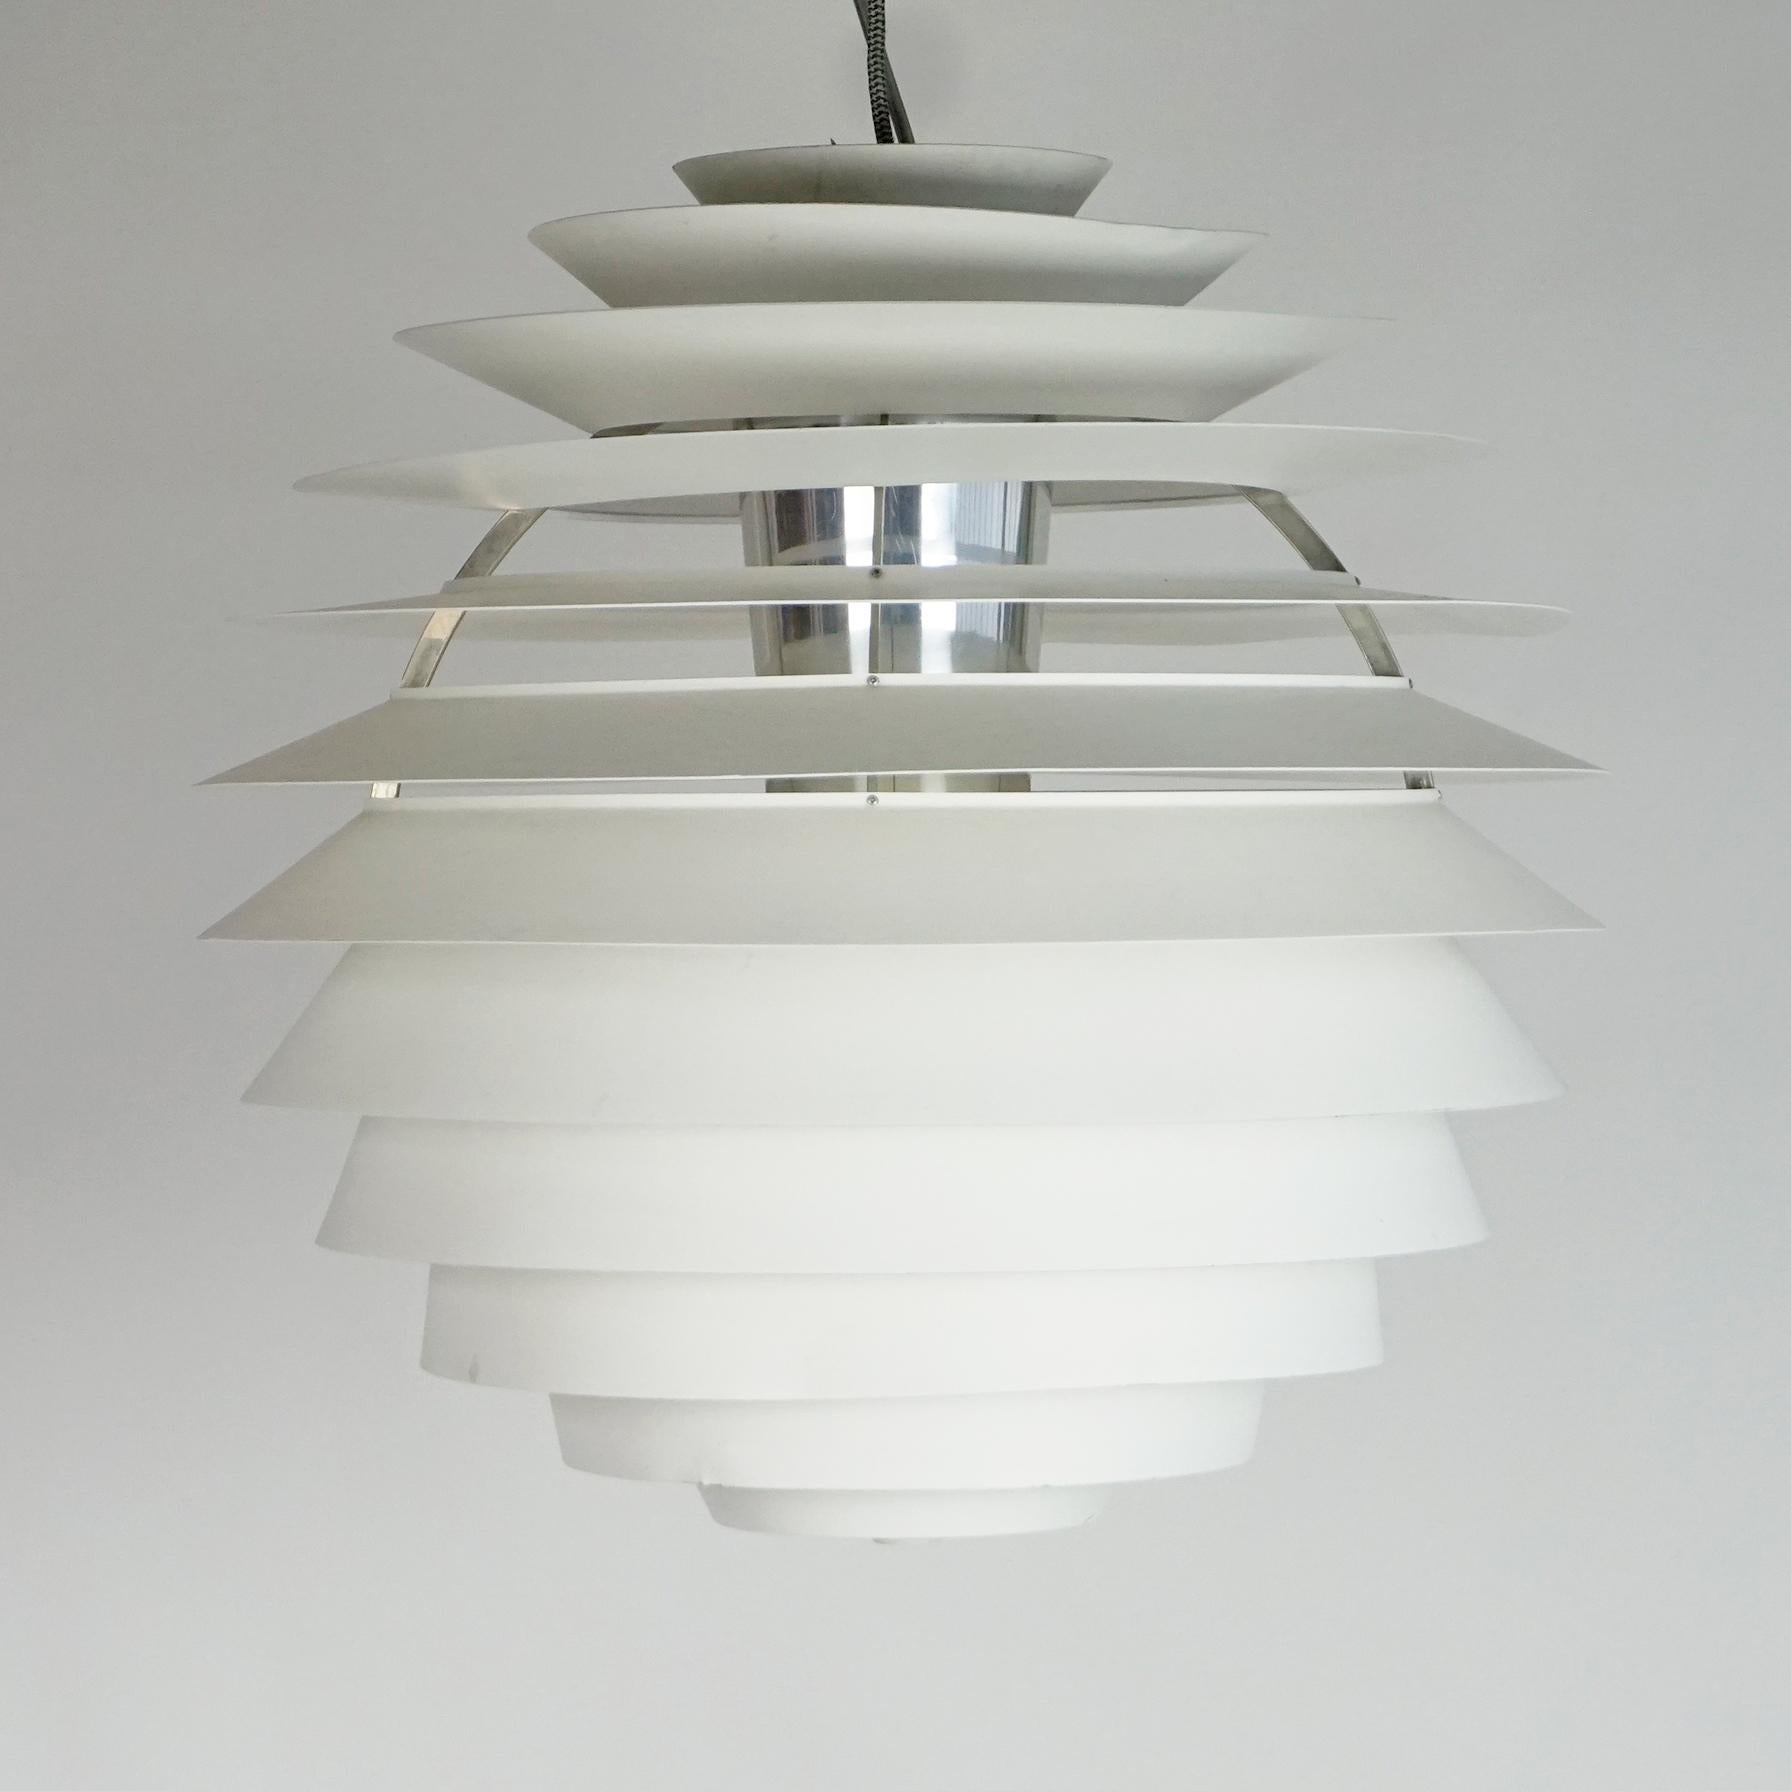 The PH Louvre was designed by Poul Henningsen 1958 and produced by Louis Poulsen.
This iconic fixture provides 100% glare-free light. Poul Henningsen developed the PH Louvre 1957 for a church in Skodsborg, Denmark.
It features 13 white lacquered